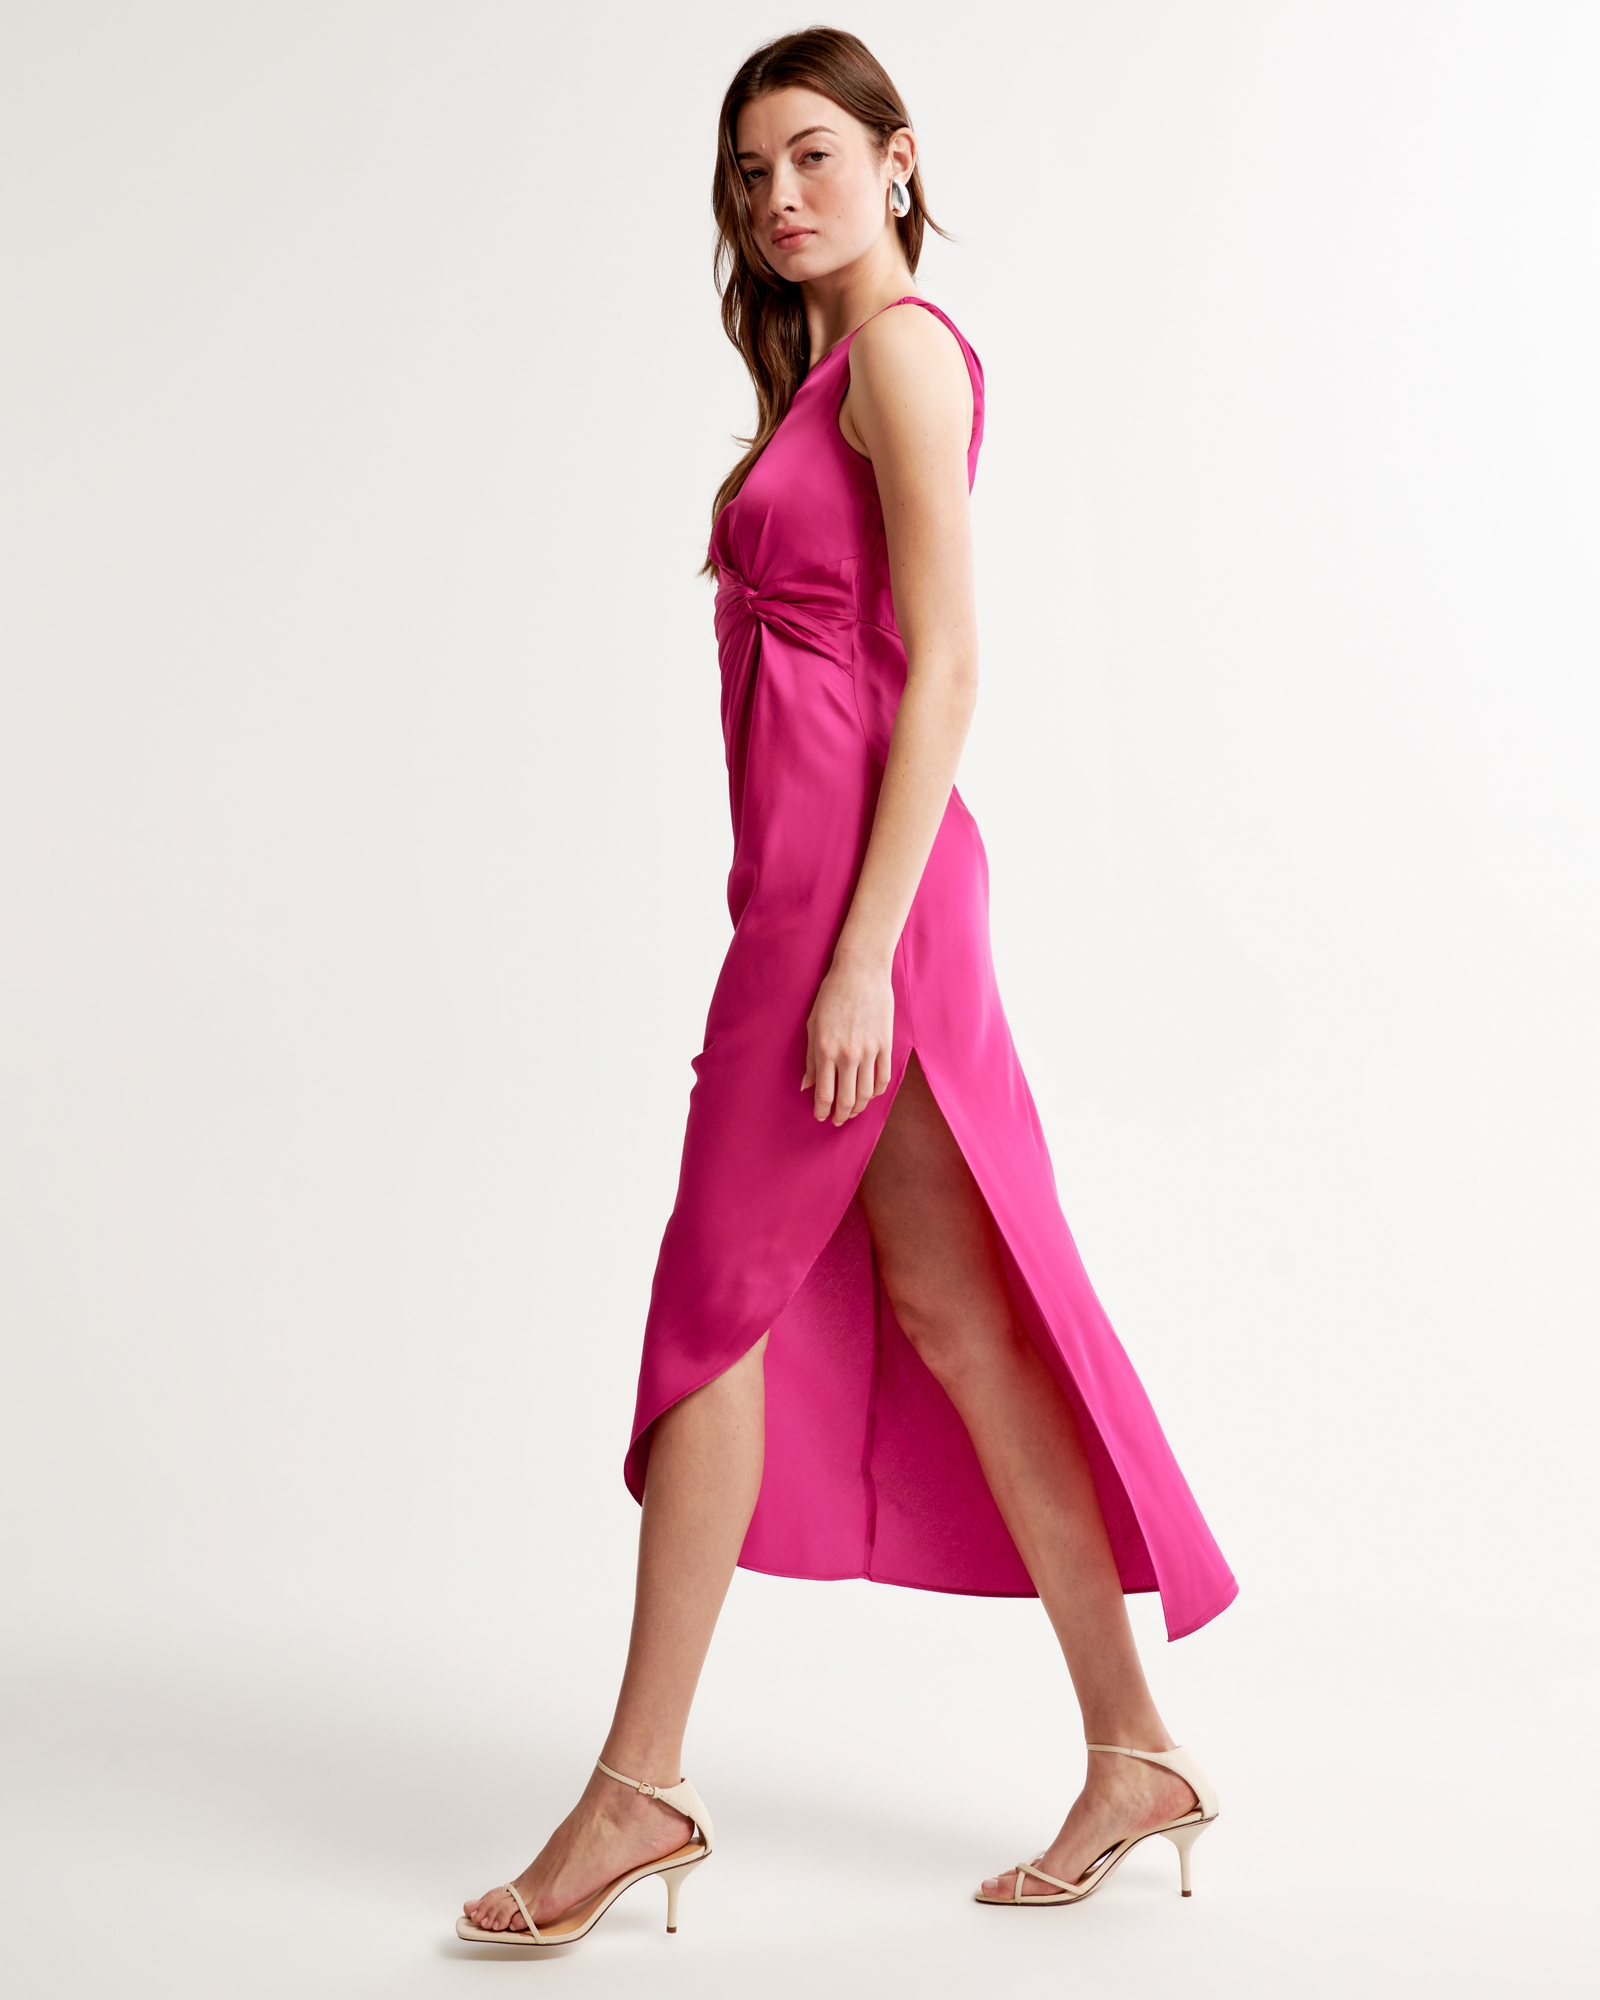 Women's One-Shoulder Satin Knotted Midi Dress, Women's Clearance